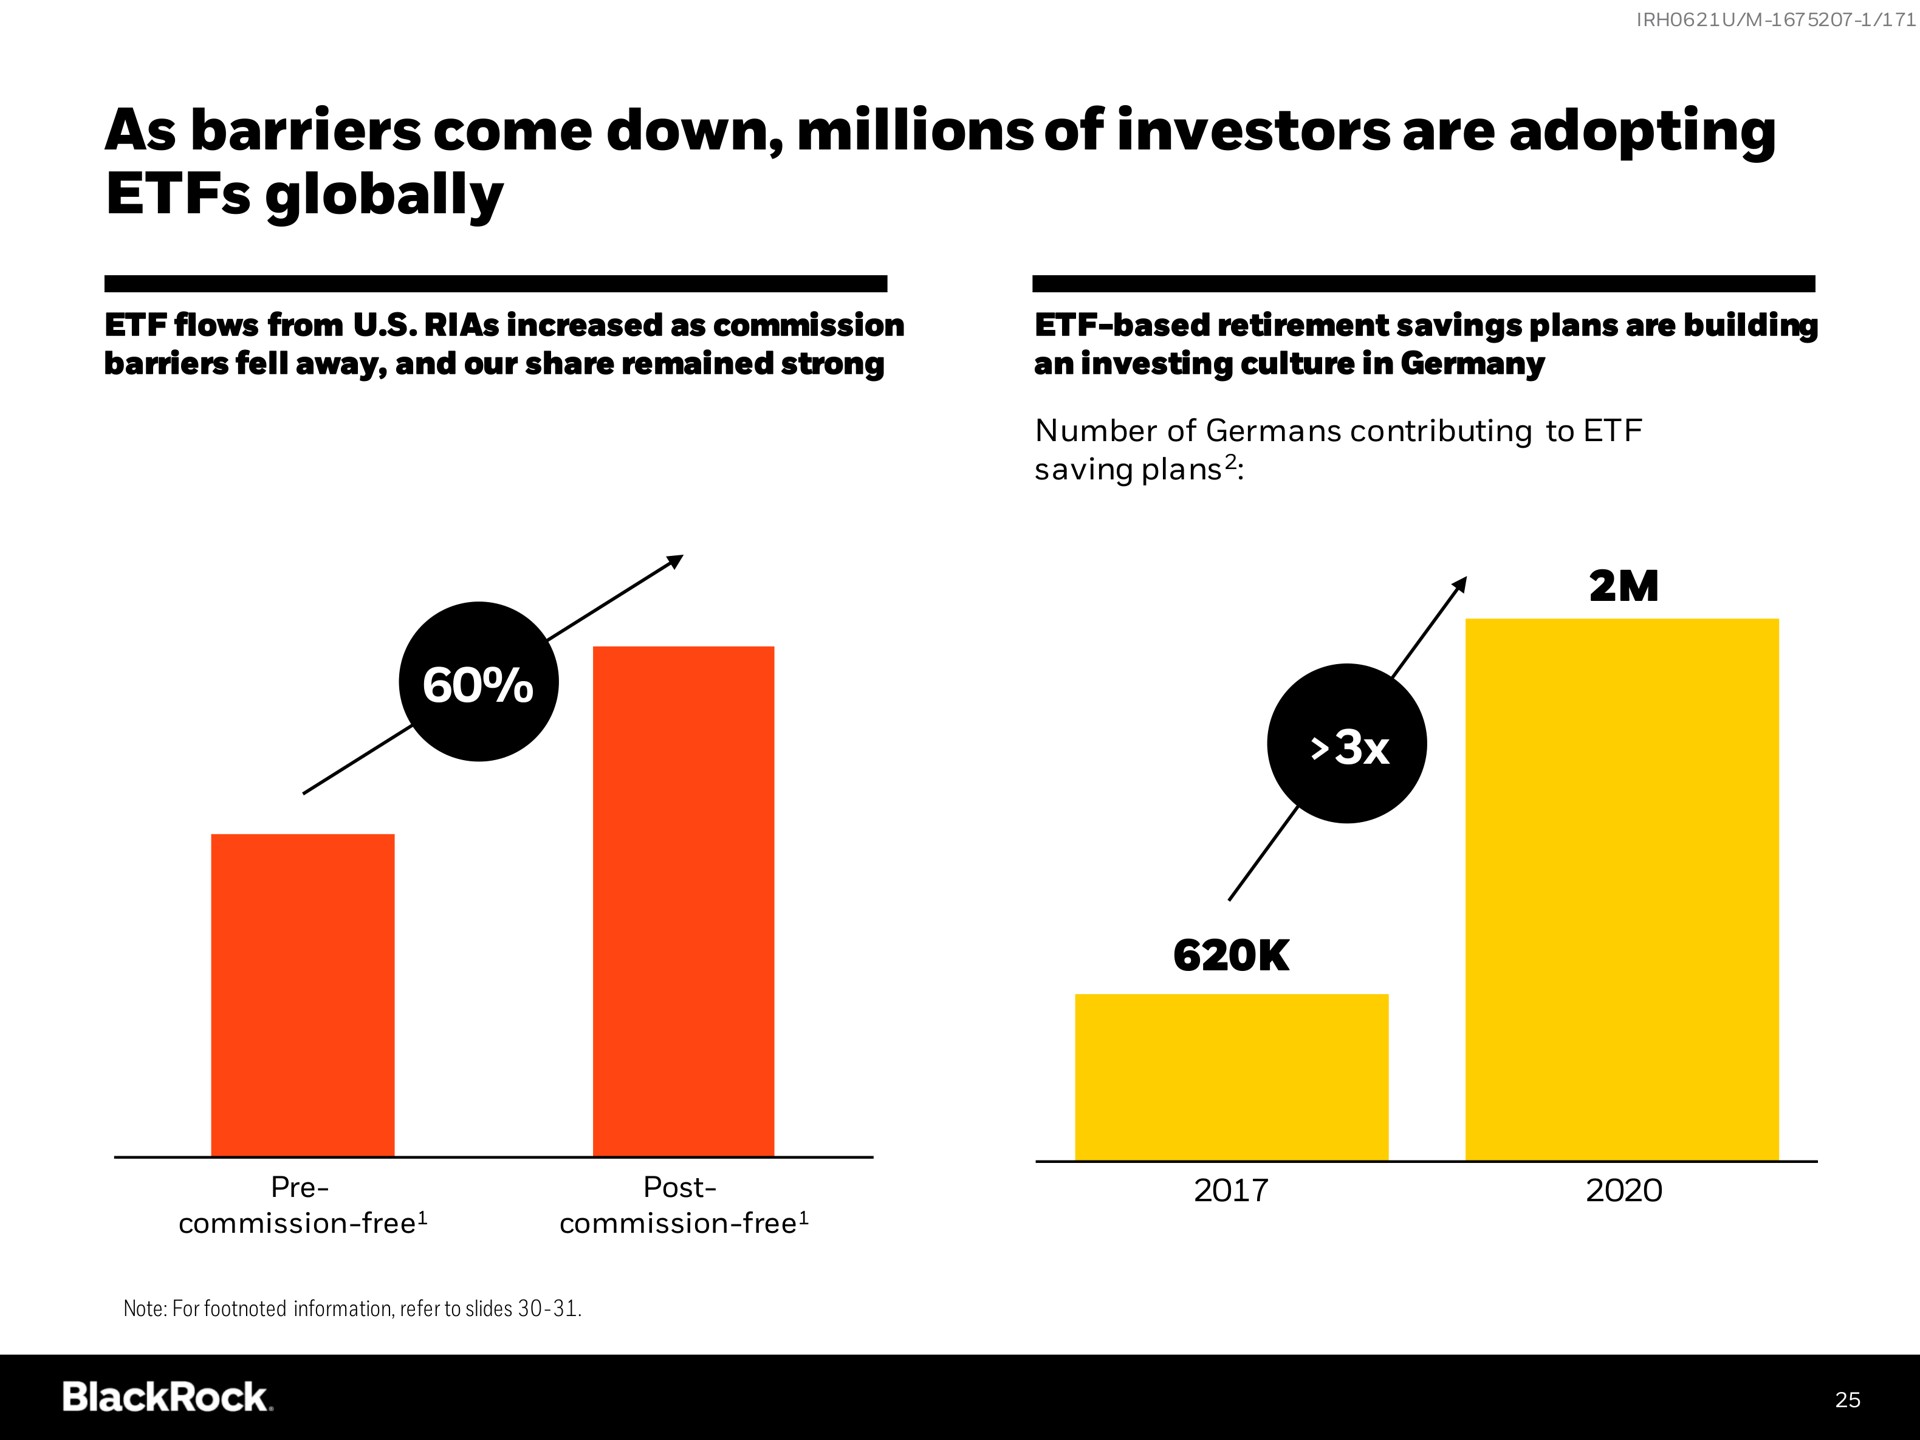 as barriers come down millions of investors are adopting globally | BlackRock